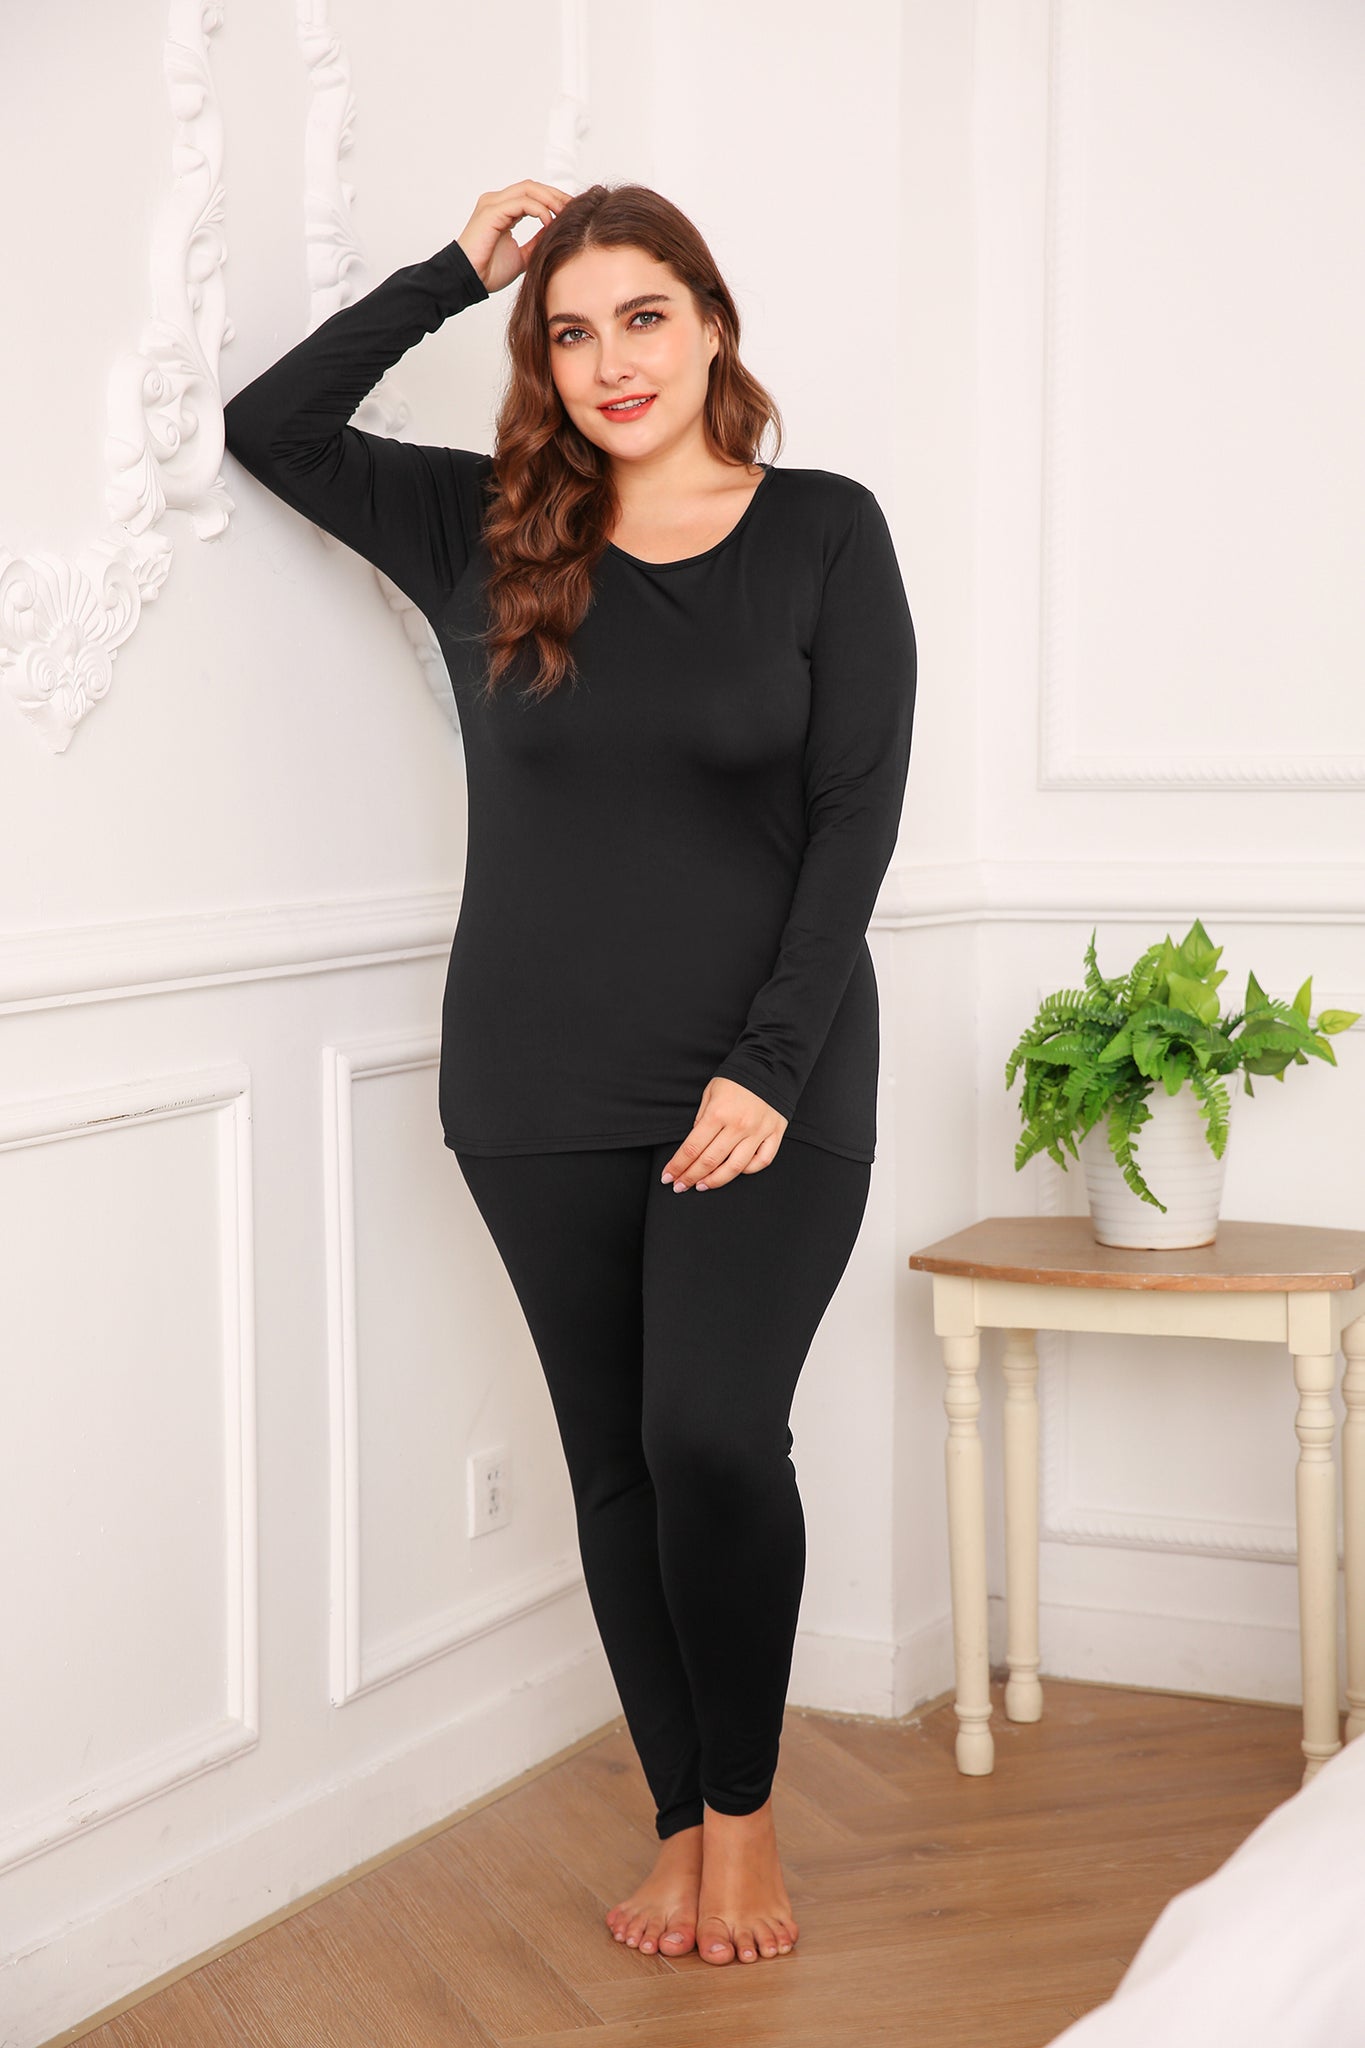 IN’VOLAND Women’s Plus Size Long Johns